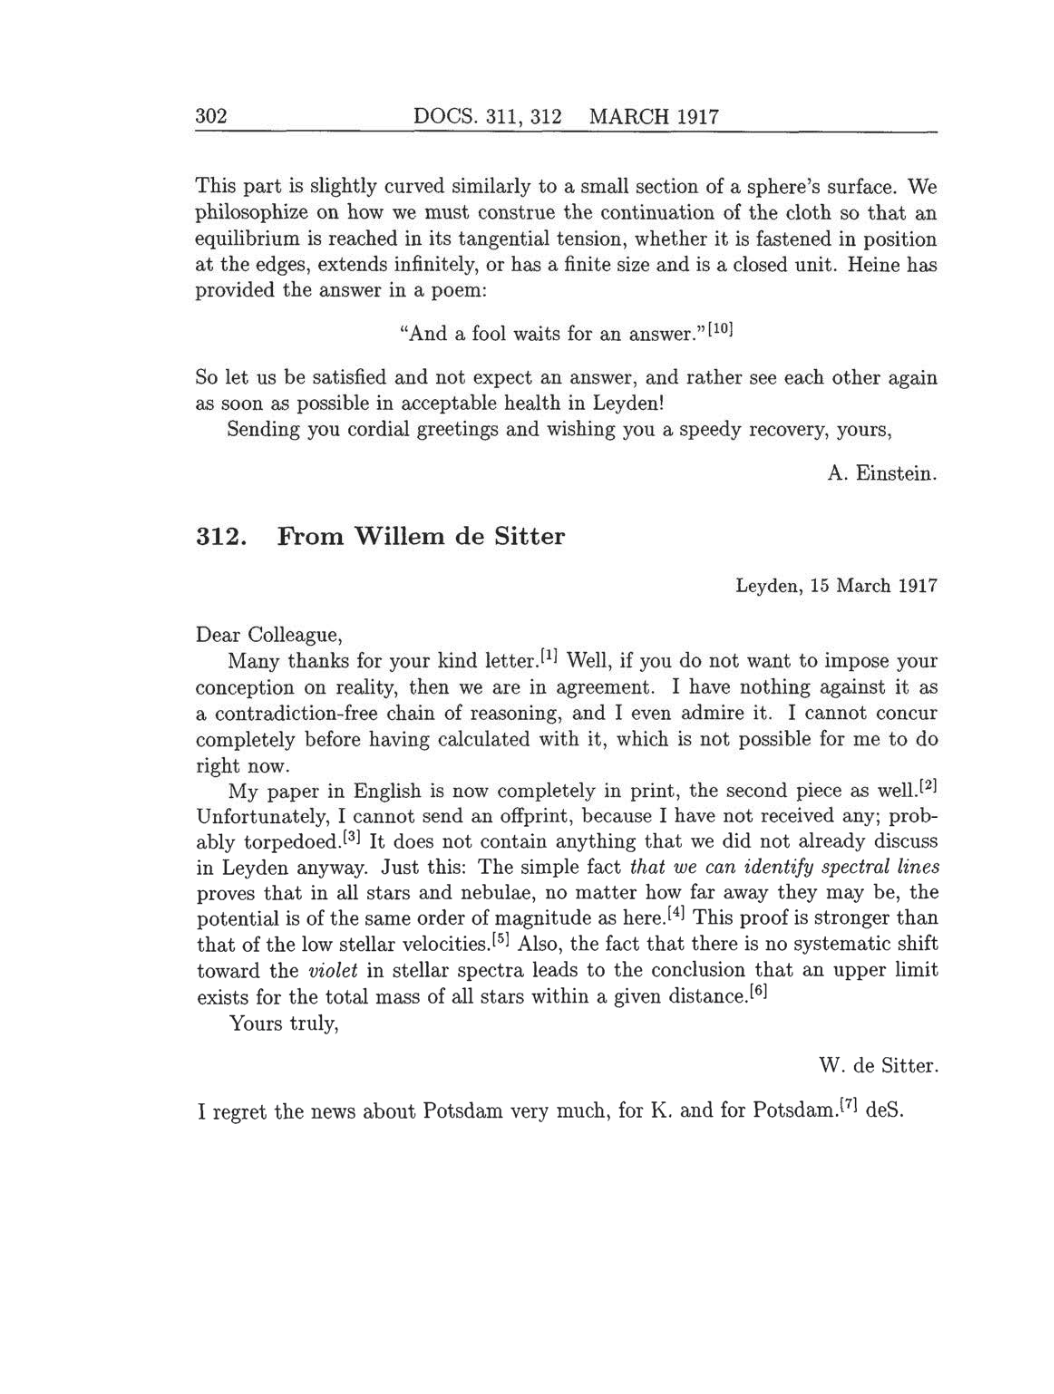 Volume 8: The Berlin Years: Correspondence, 1914-1918 (English translation supplement) page 302